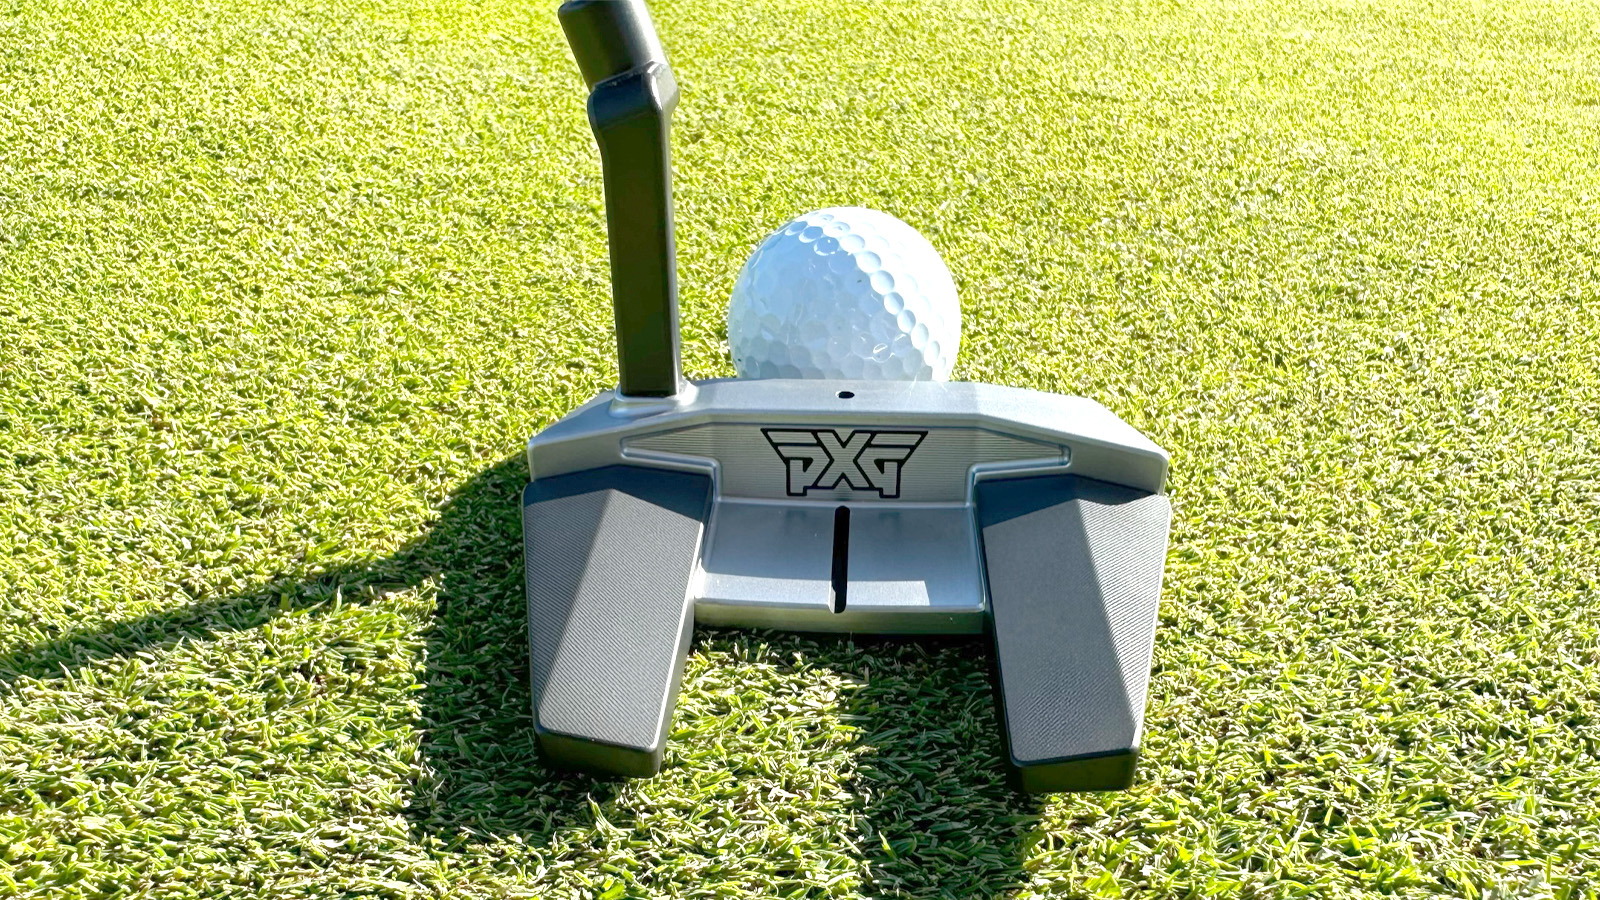 PXG Battle Ready II Bat Attack Putter Review | Golf Monthly